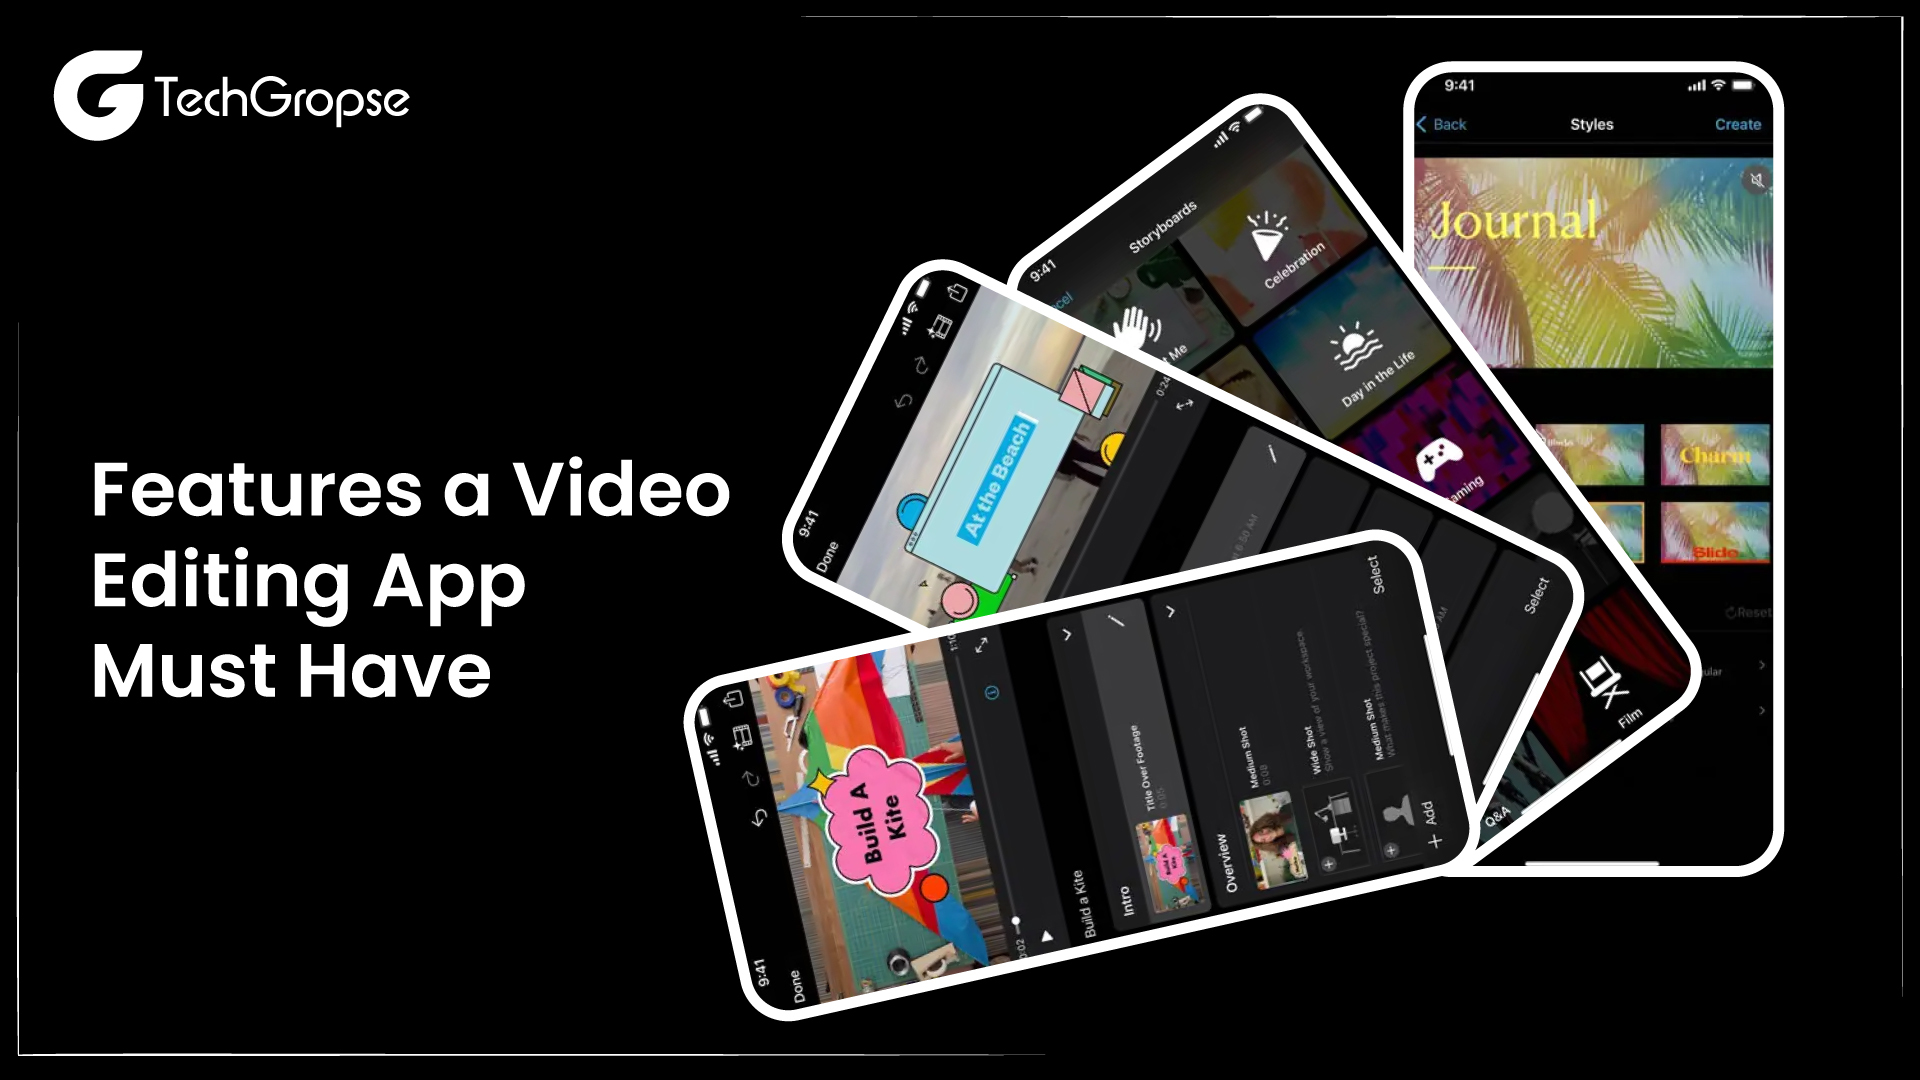 Features a Video Editing App Must Have